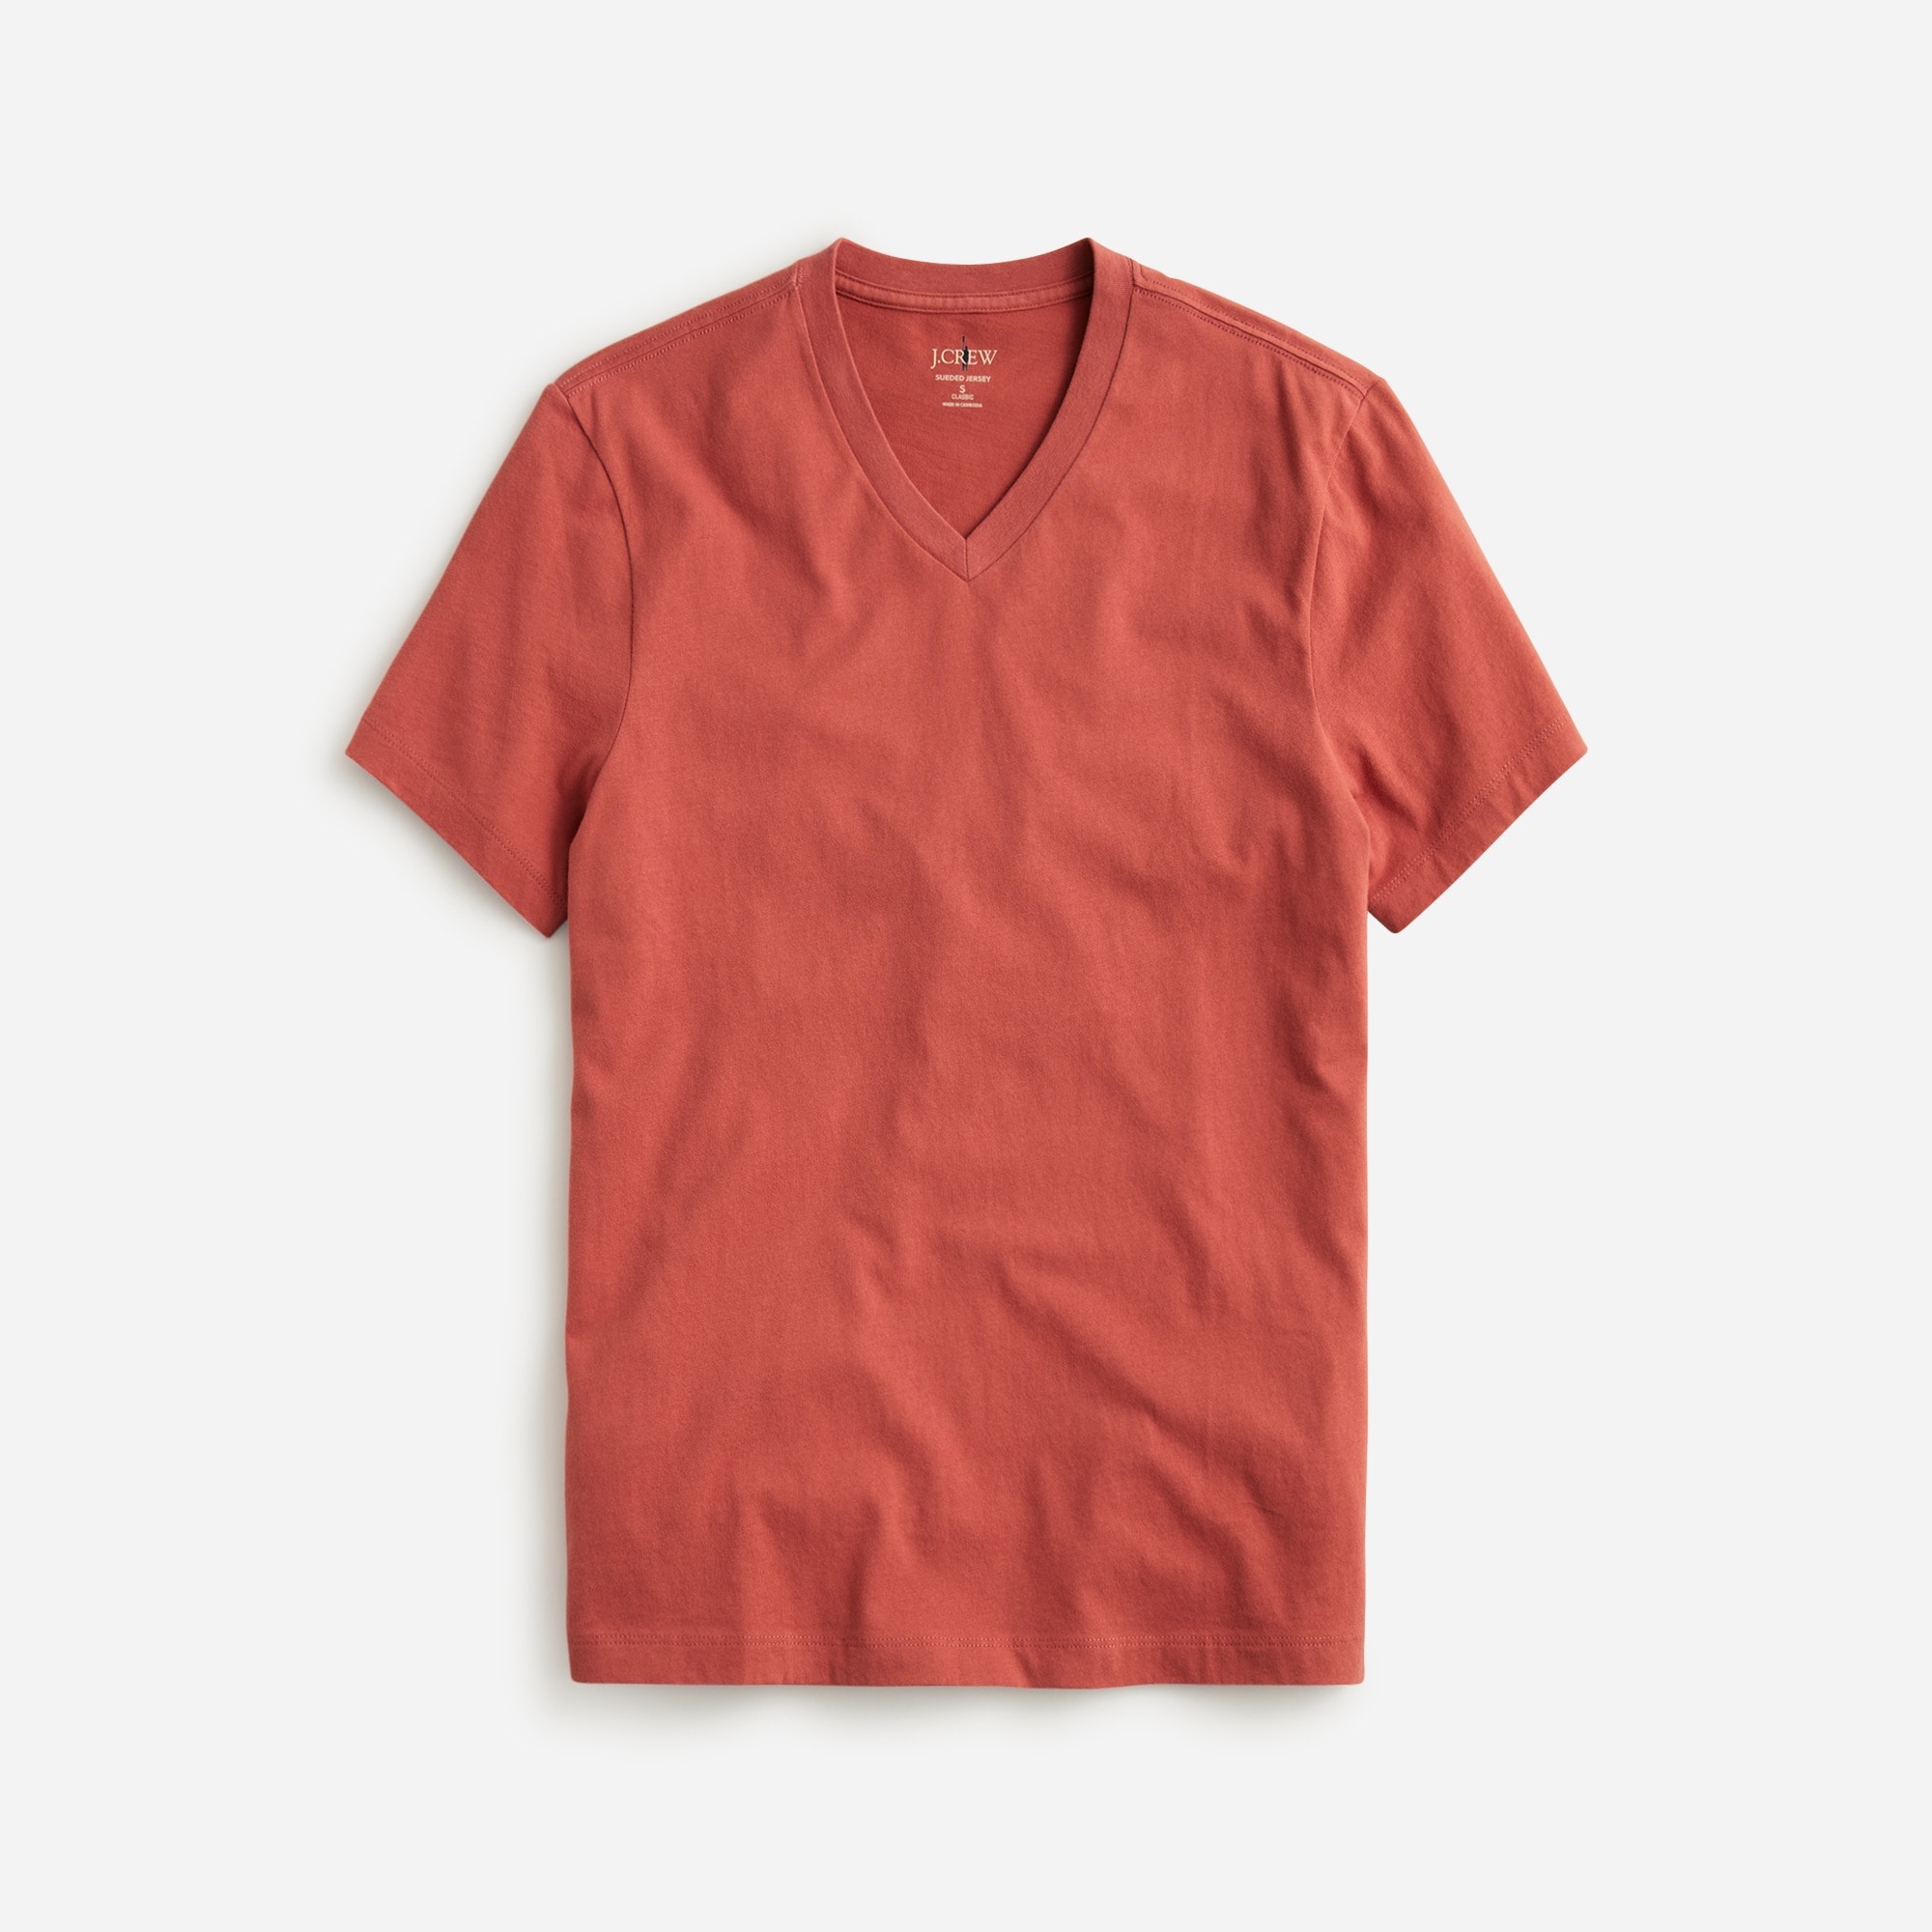  Tall sueded cotton V-neck T-shirt